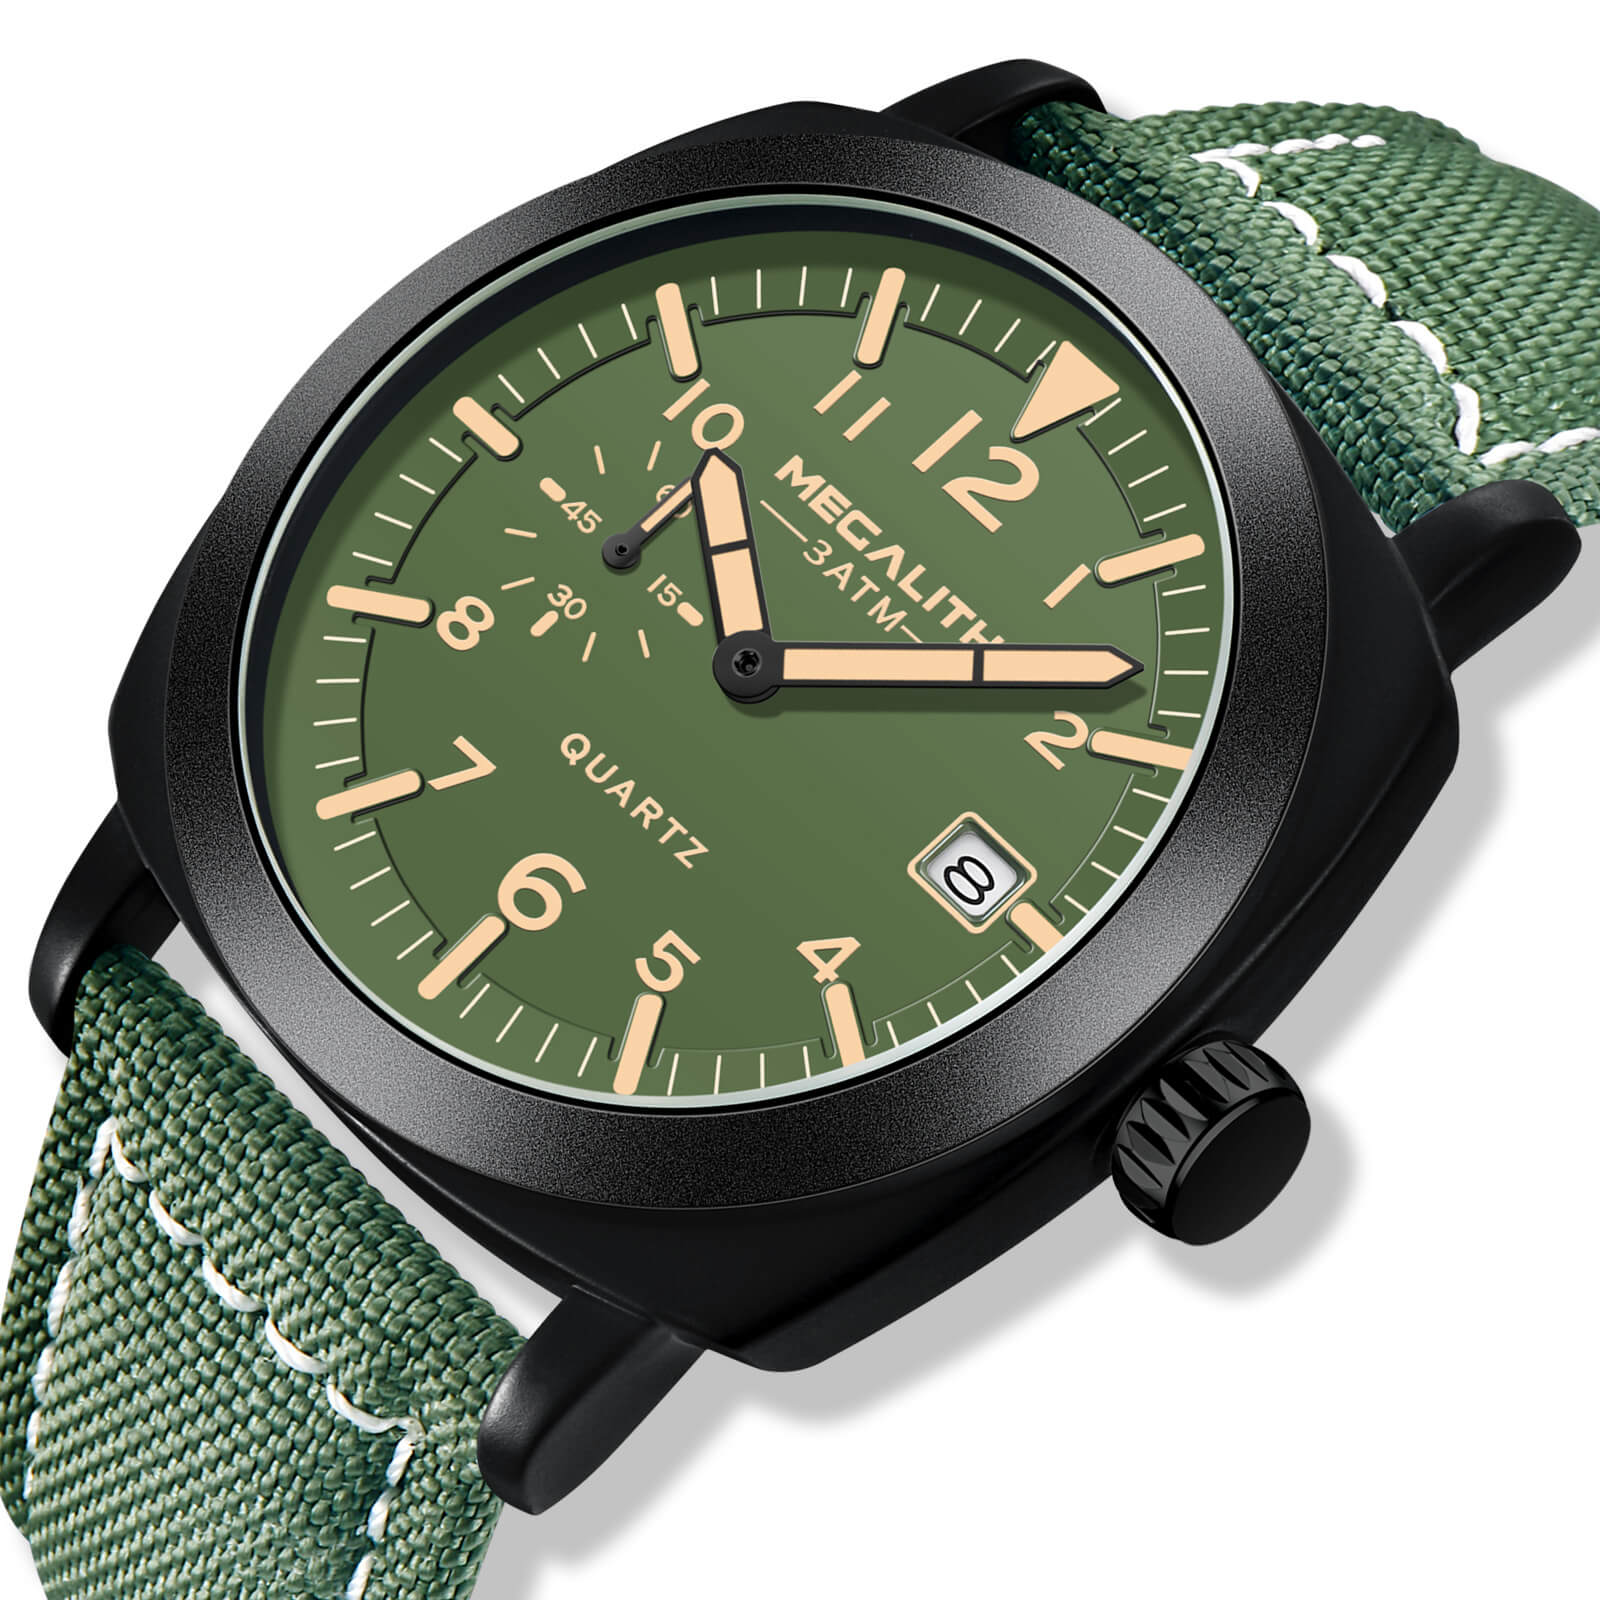 Megalith 8283M-megalith watch